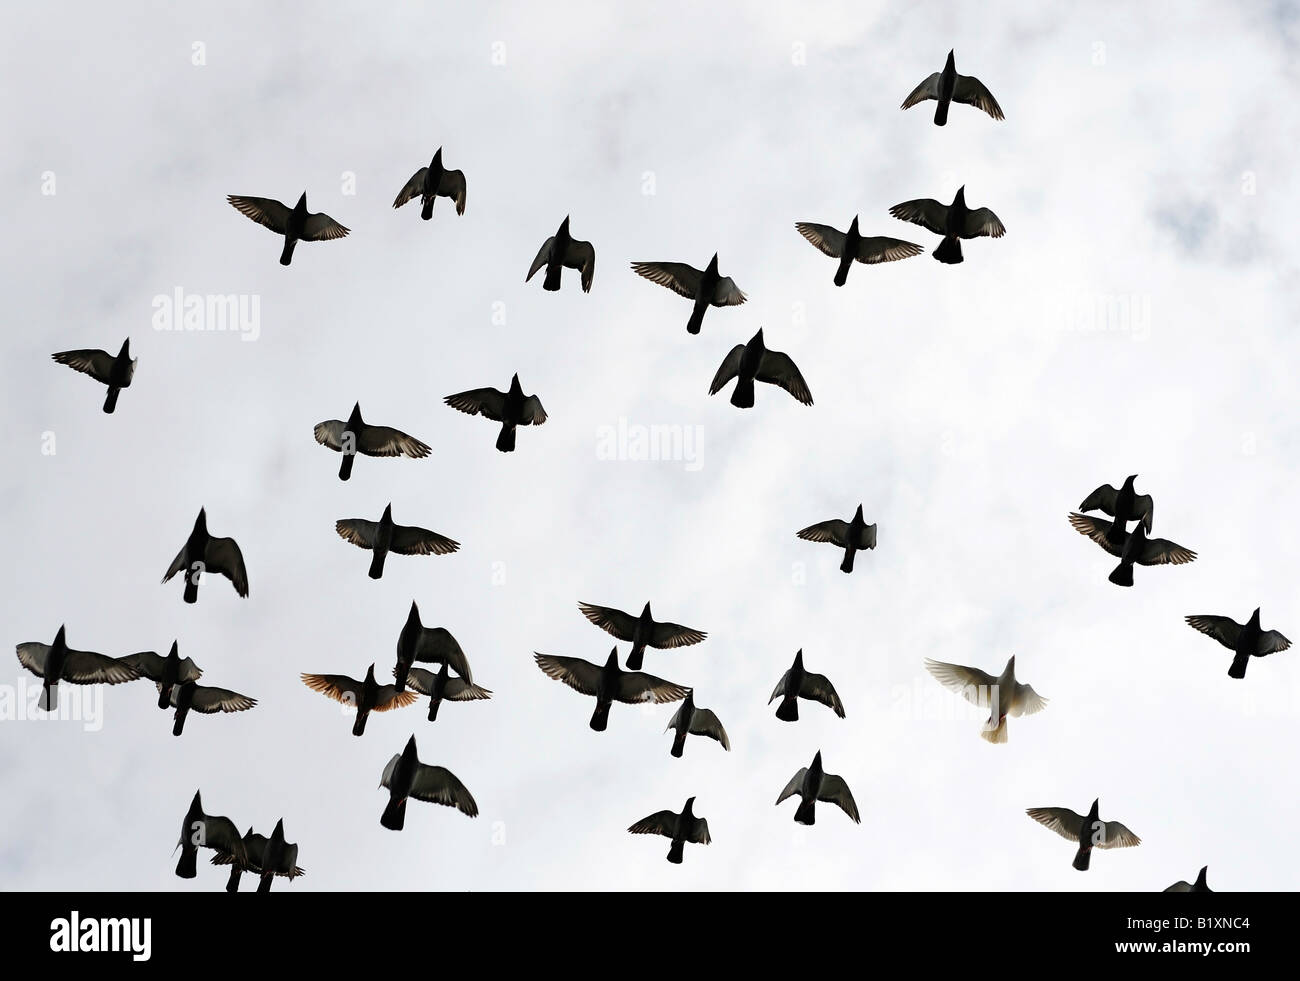 A flock of pigeons flying. 05-Jul-2008 Stock Photo